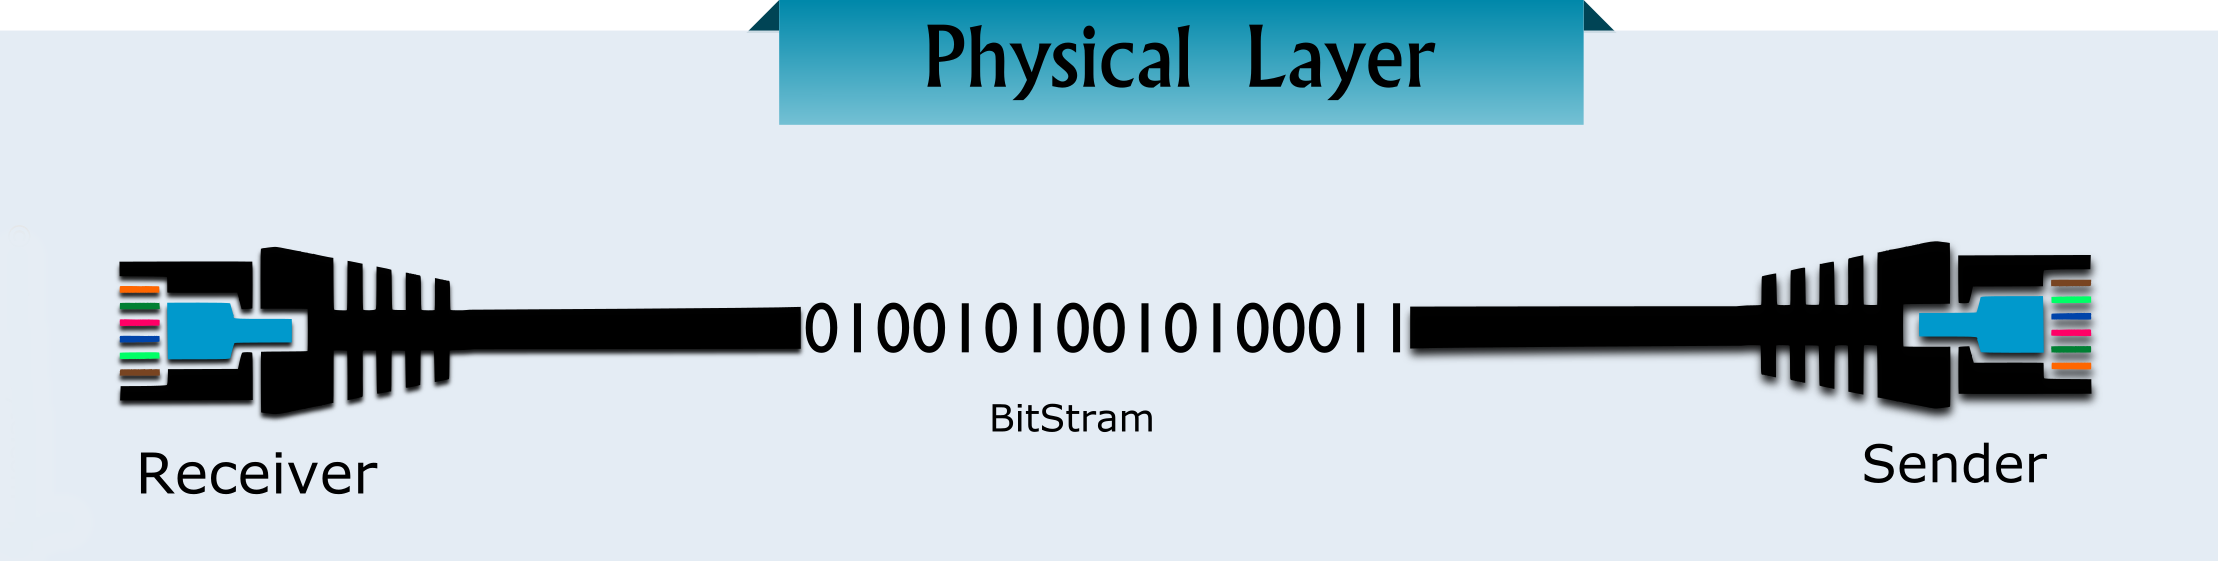 physical layer in OSI model